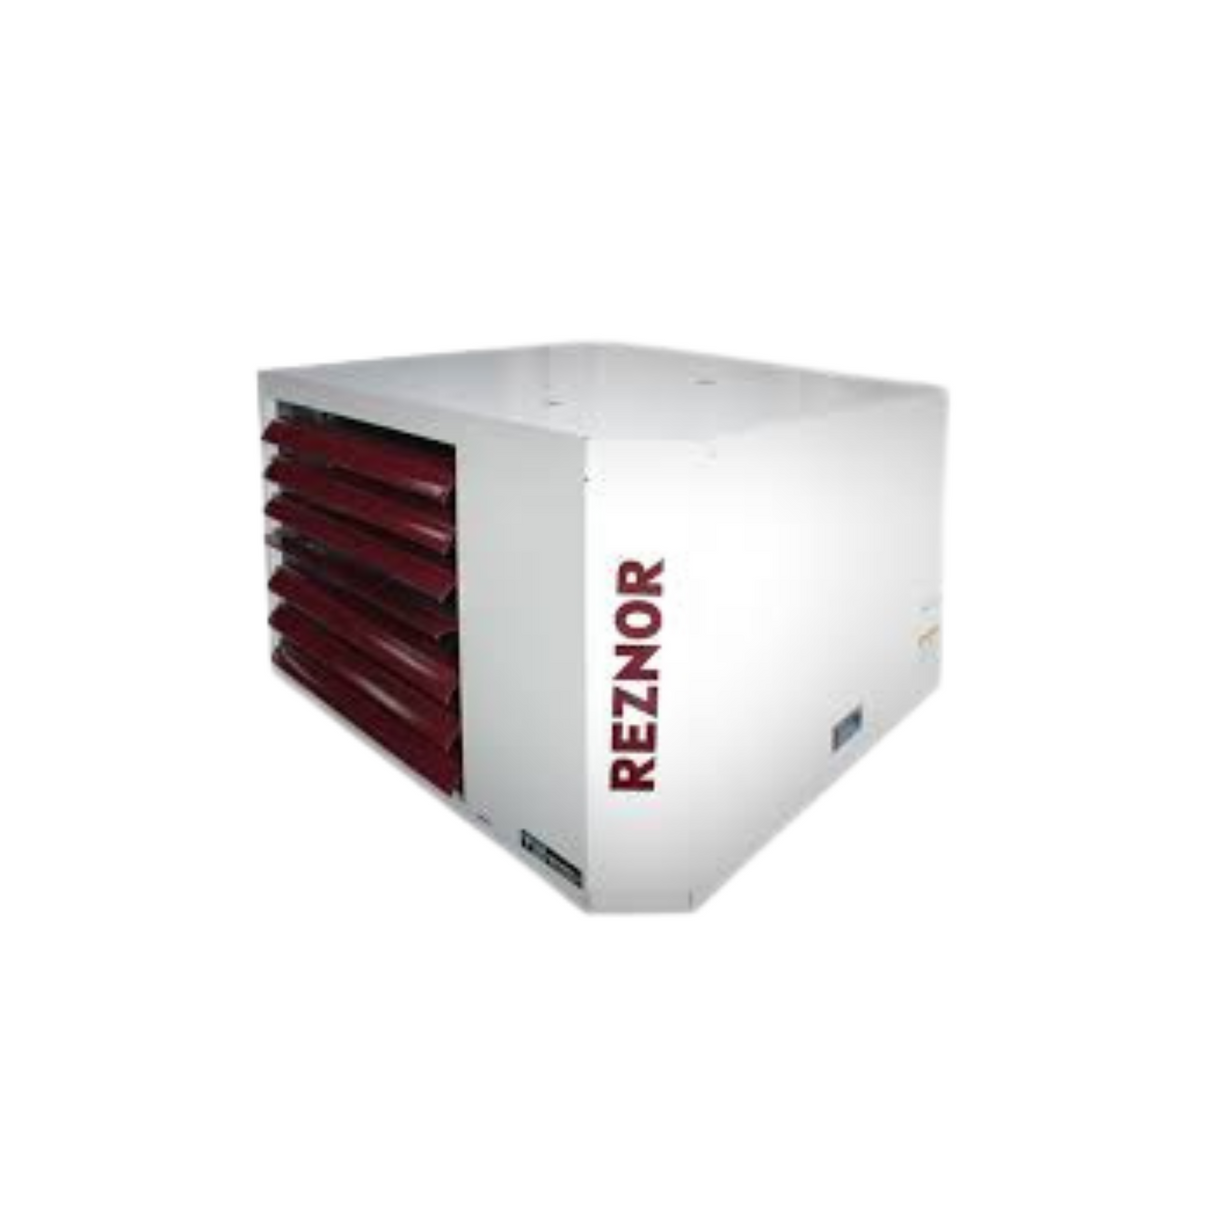 Reznor UDX-200 200,000 BTU Power Vented Gas Fired Unit Heater (Must Ship Ltl-Frieght) (Call for Sizing)